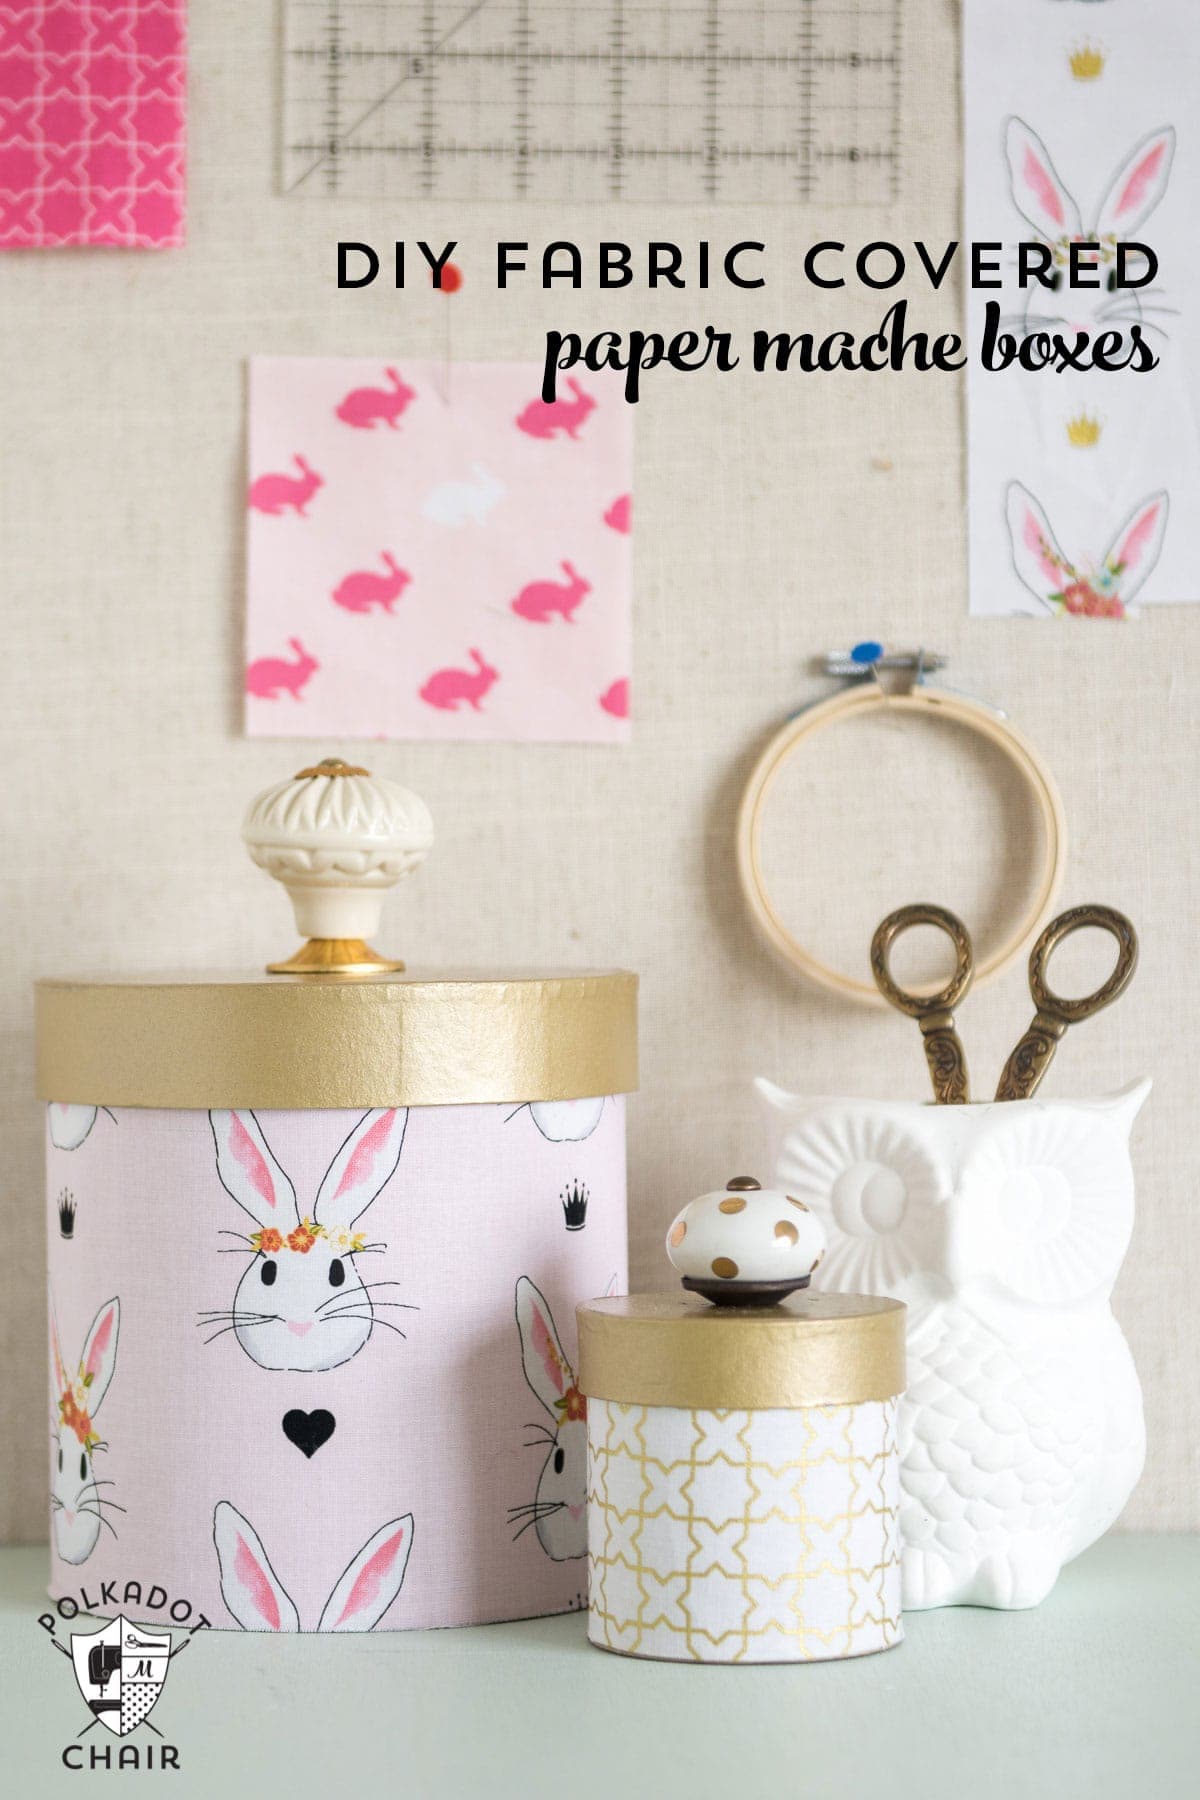 How to Cover Paper Mache Boxes with Fabric - The Polka Dot Chair